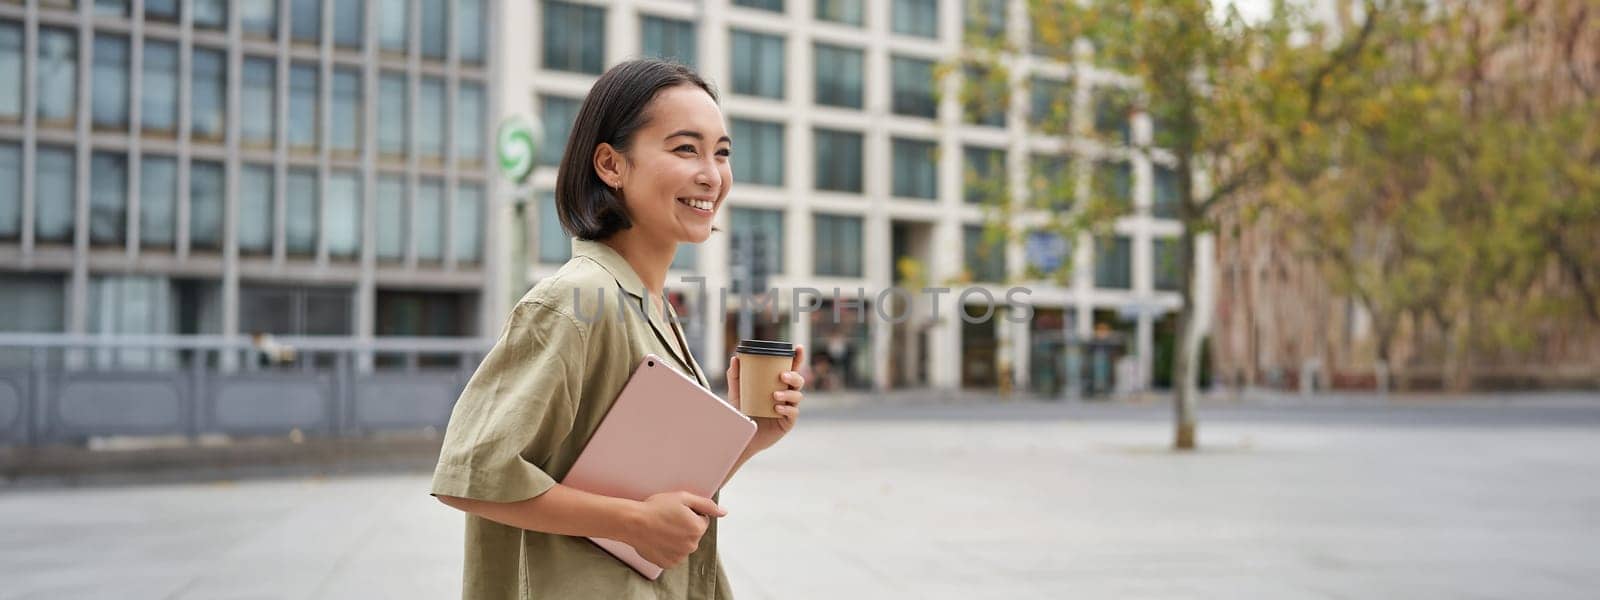 Stylish city girl with tablet, walking on street and drinking takeaway coffee, going to university or work.